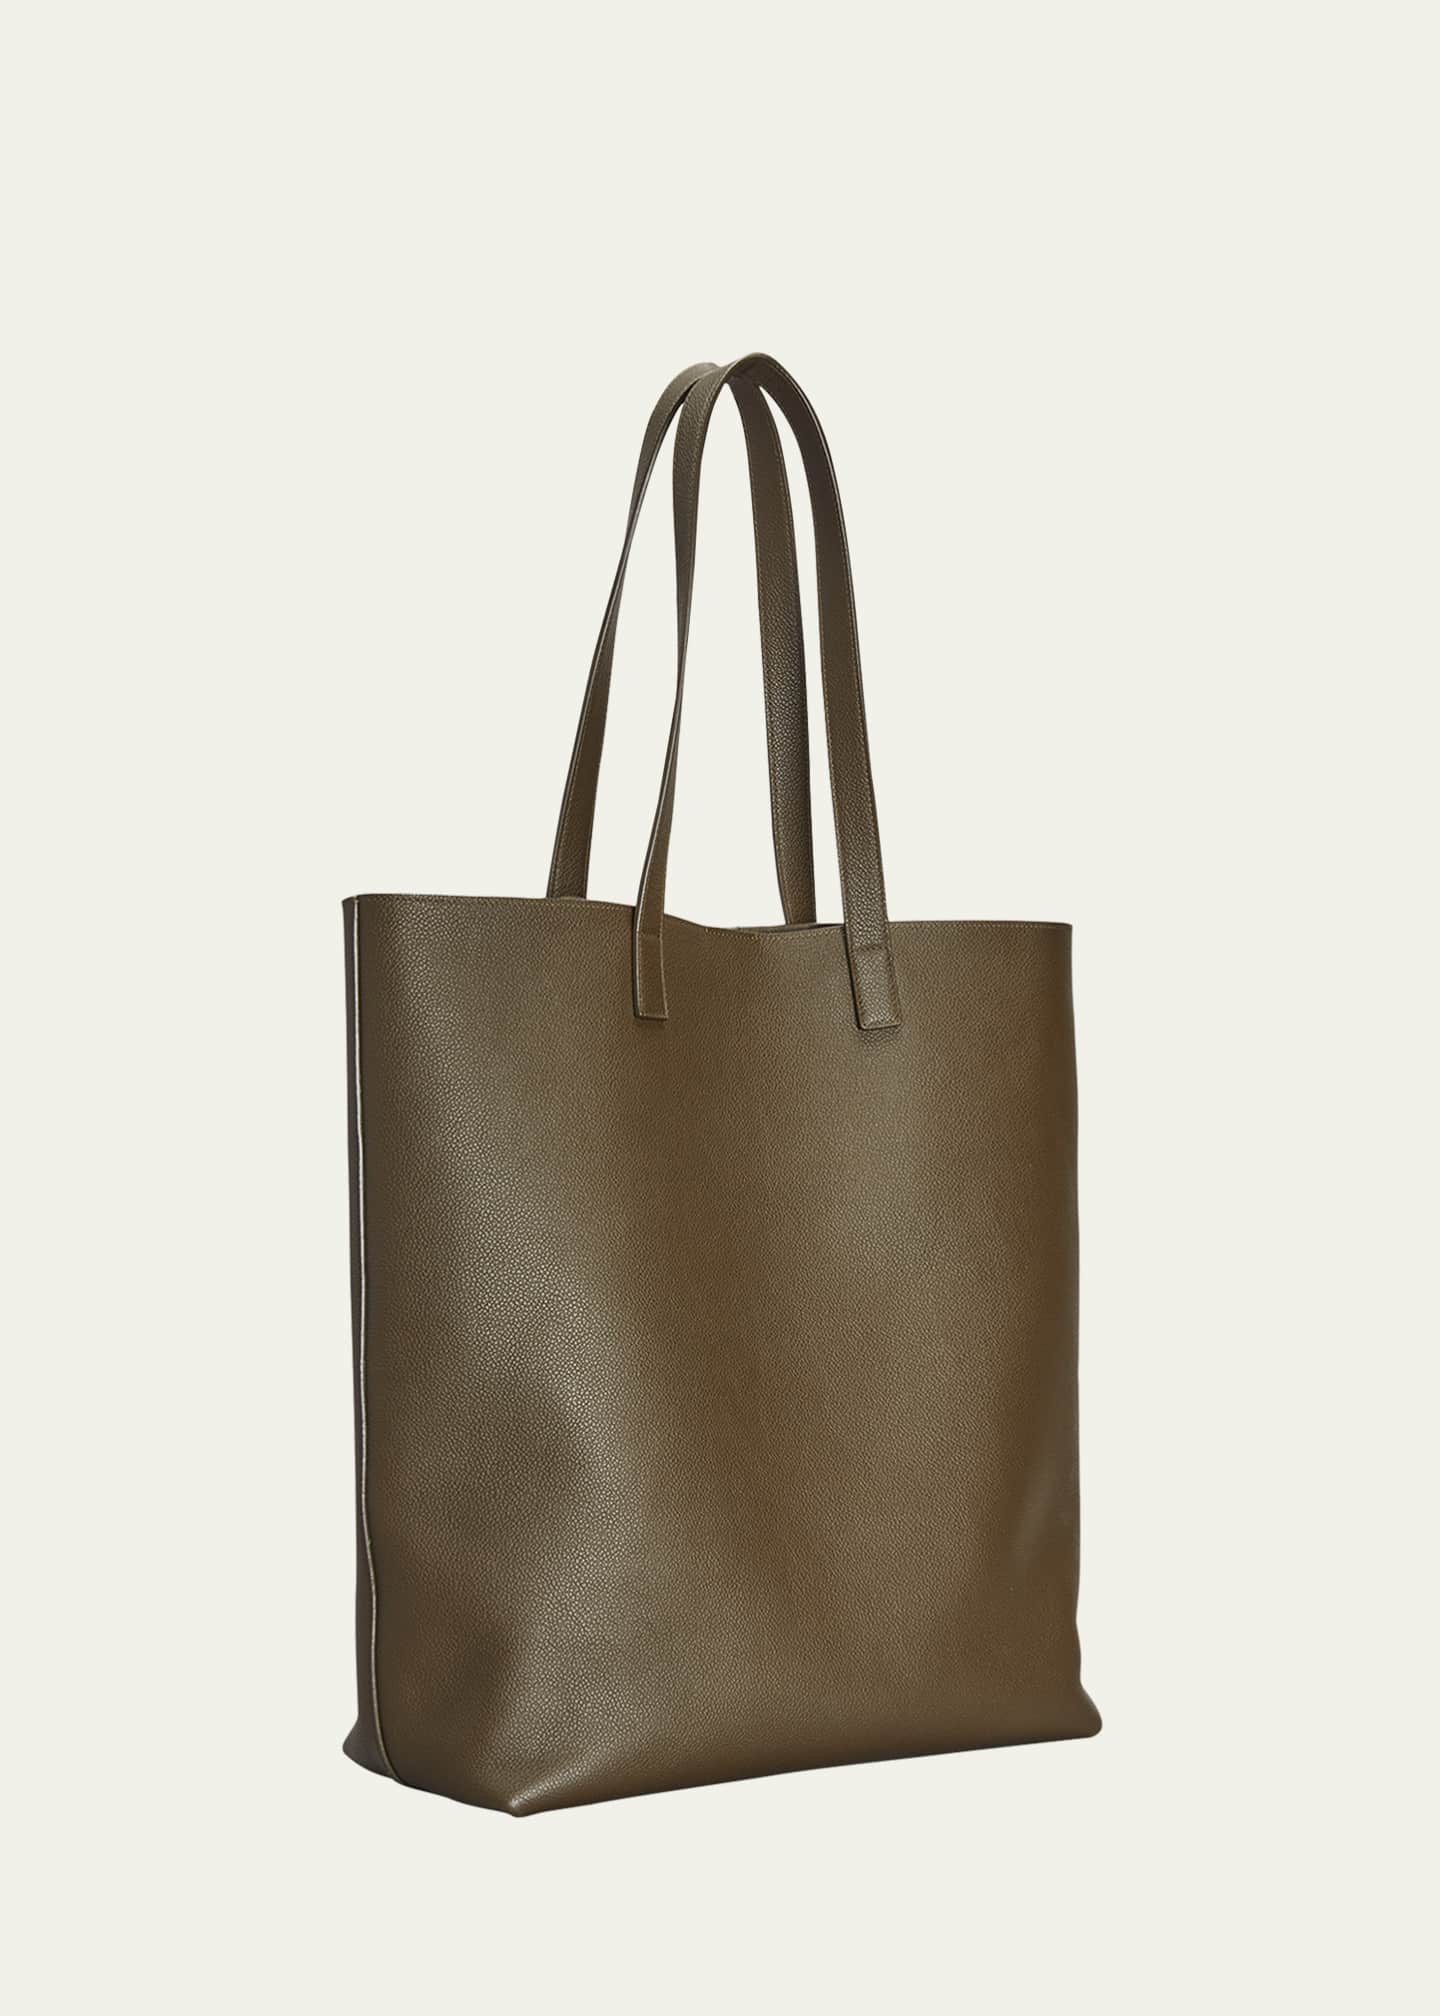 Saint Laurent North-South Leather Shopping Tote Bag - Bergdorf Goodman